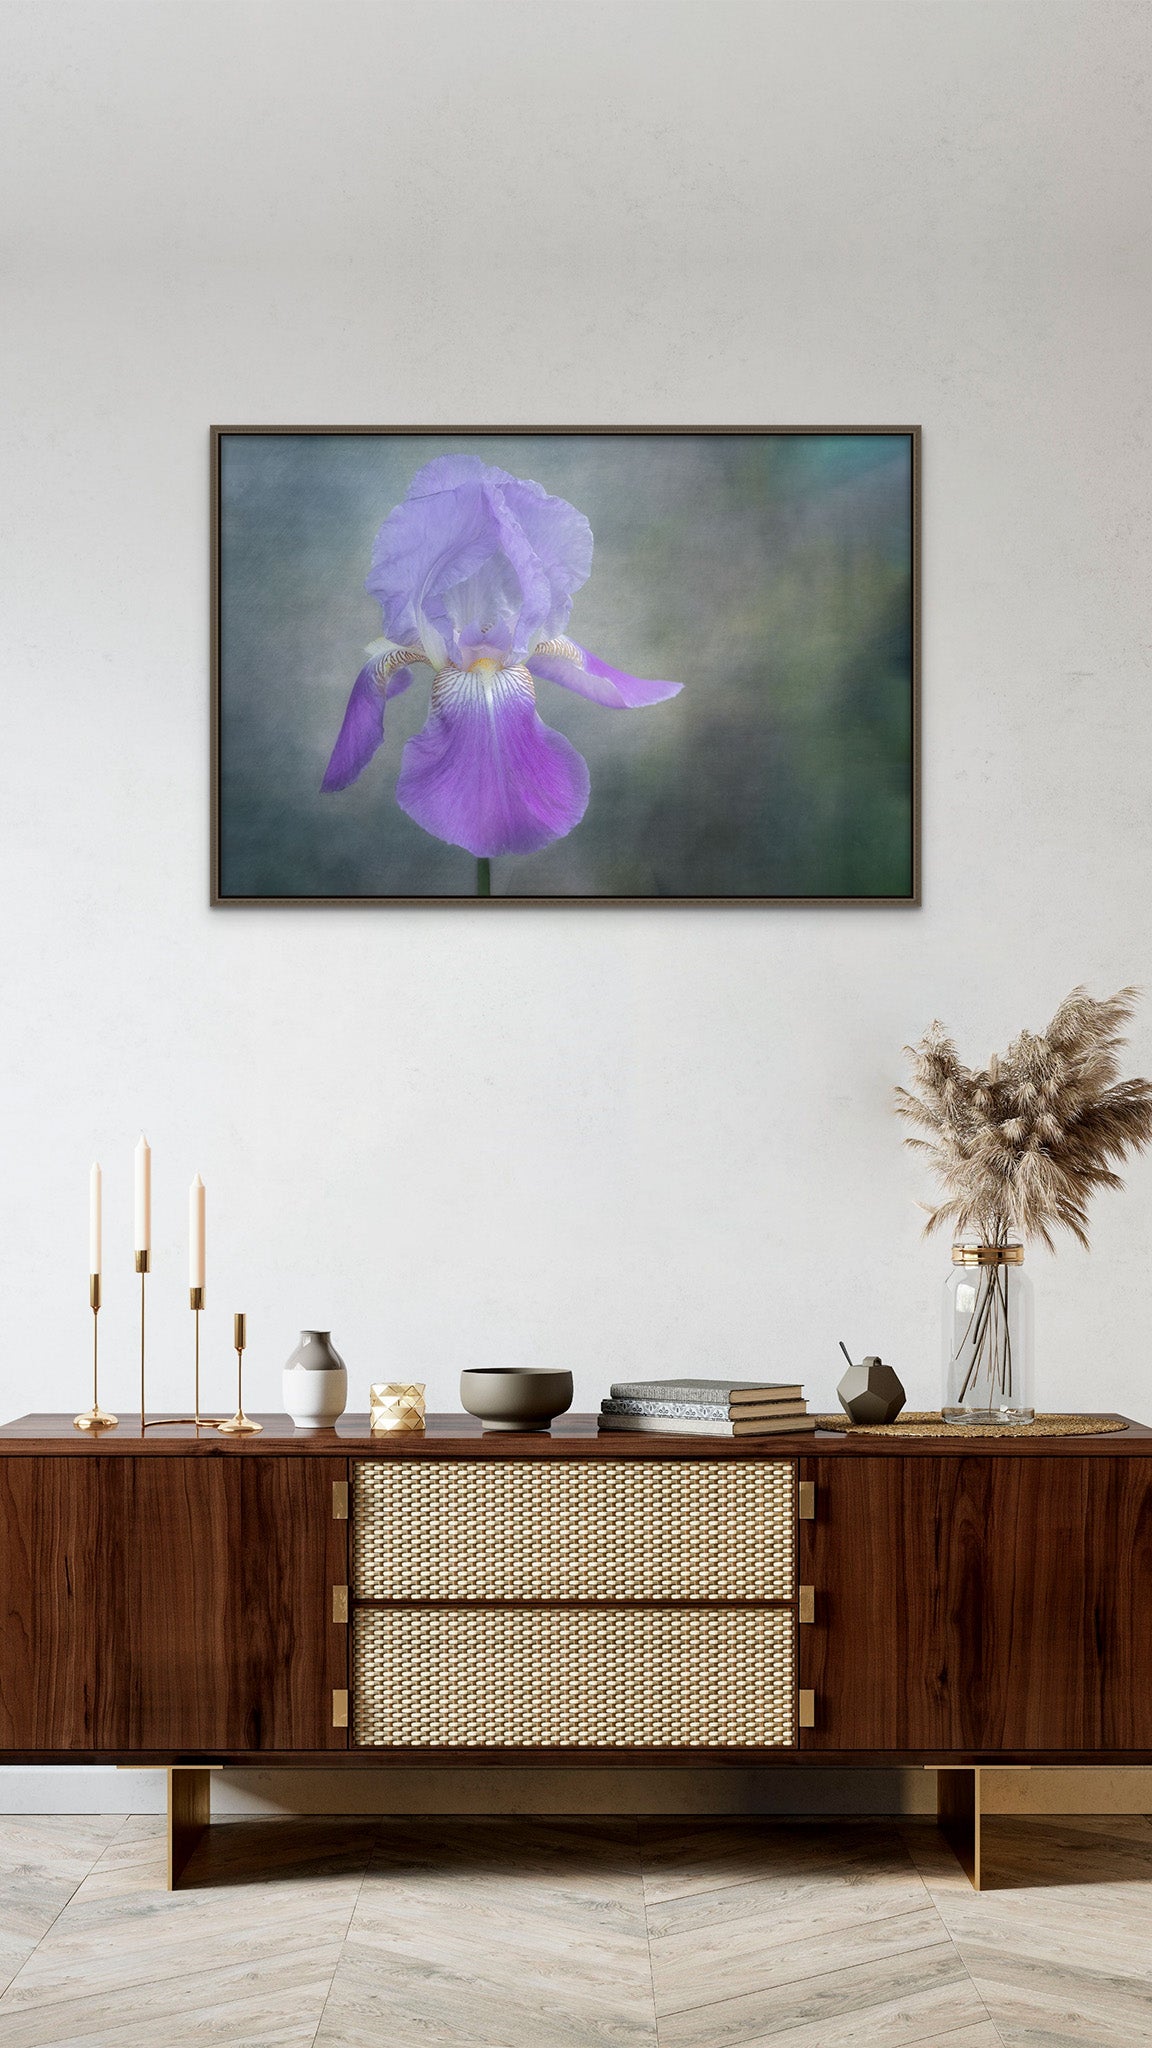 Picture hanging on the wall of a room. The picture is a fine art flower photograph of a purple Iris flower titled "Empowered" by Cameron Dreaux of Dreaux Fine Art.